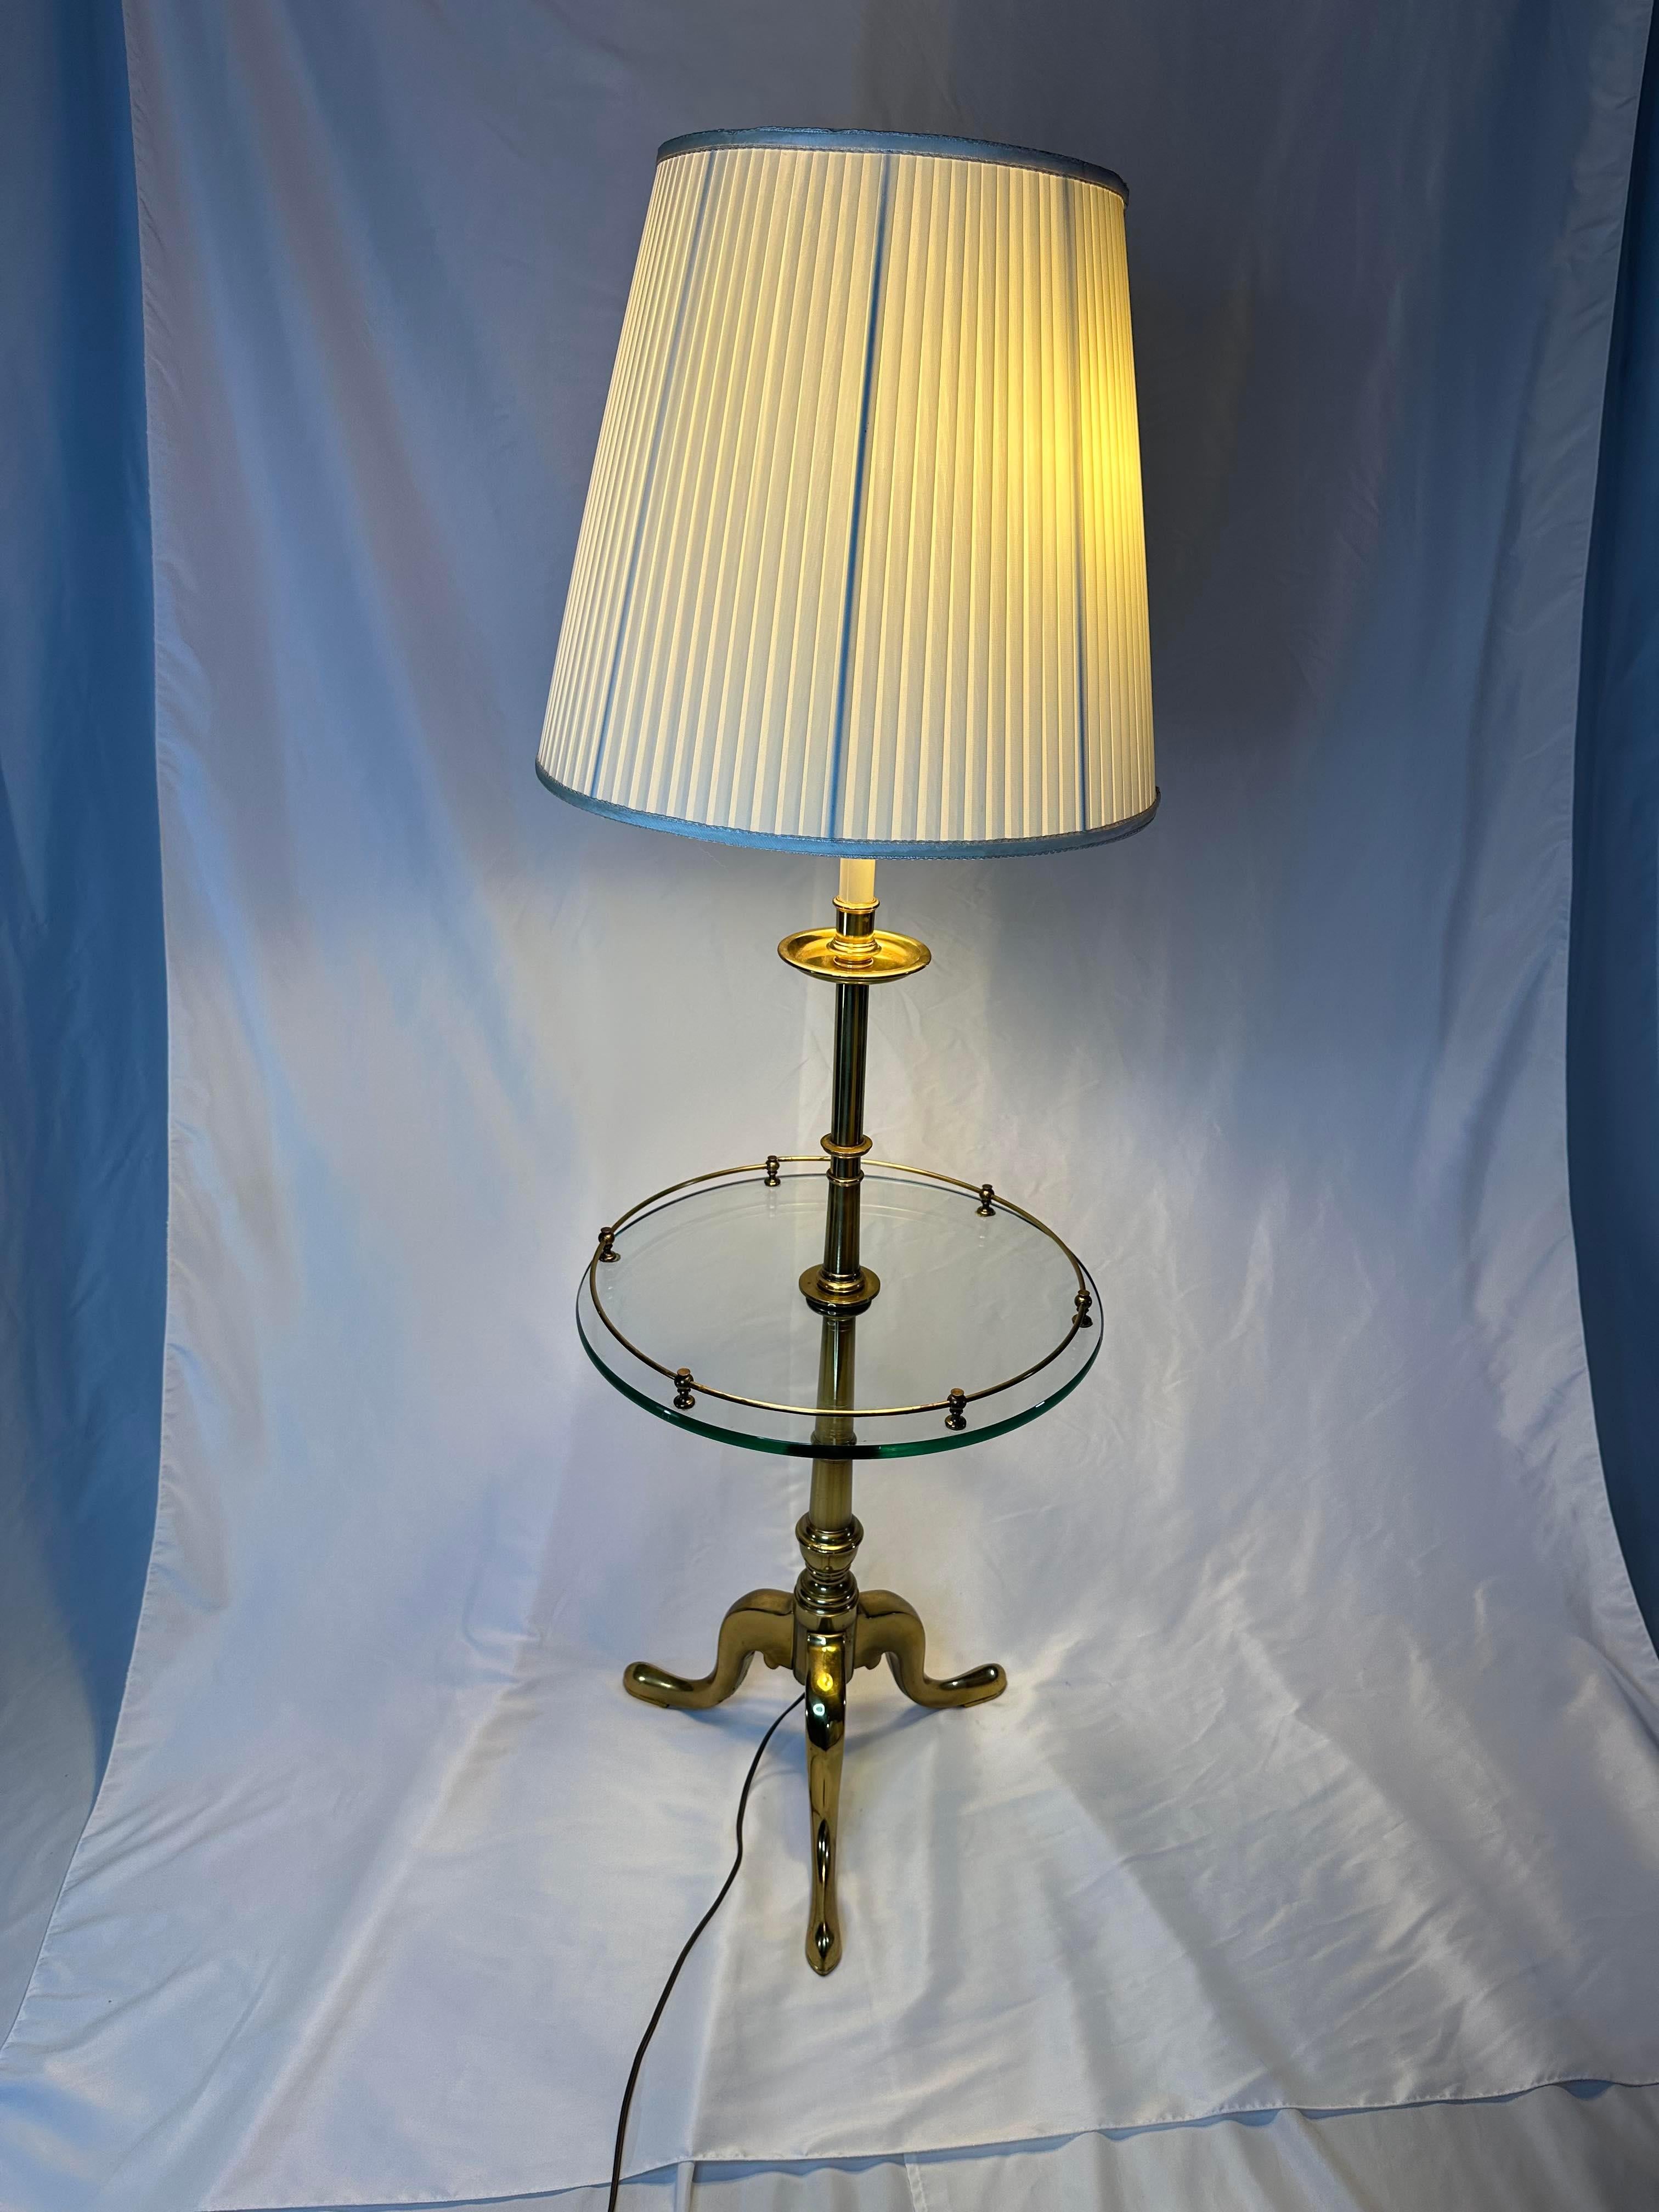 French Provincial Stiffel Floor Lamp With Glass Table and tripod legs 15